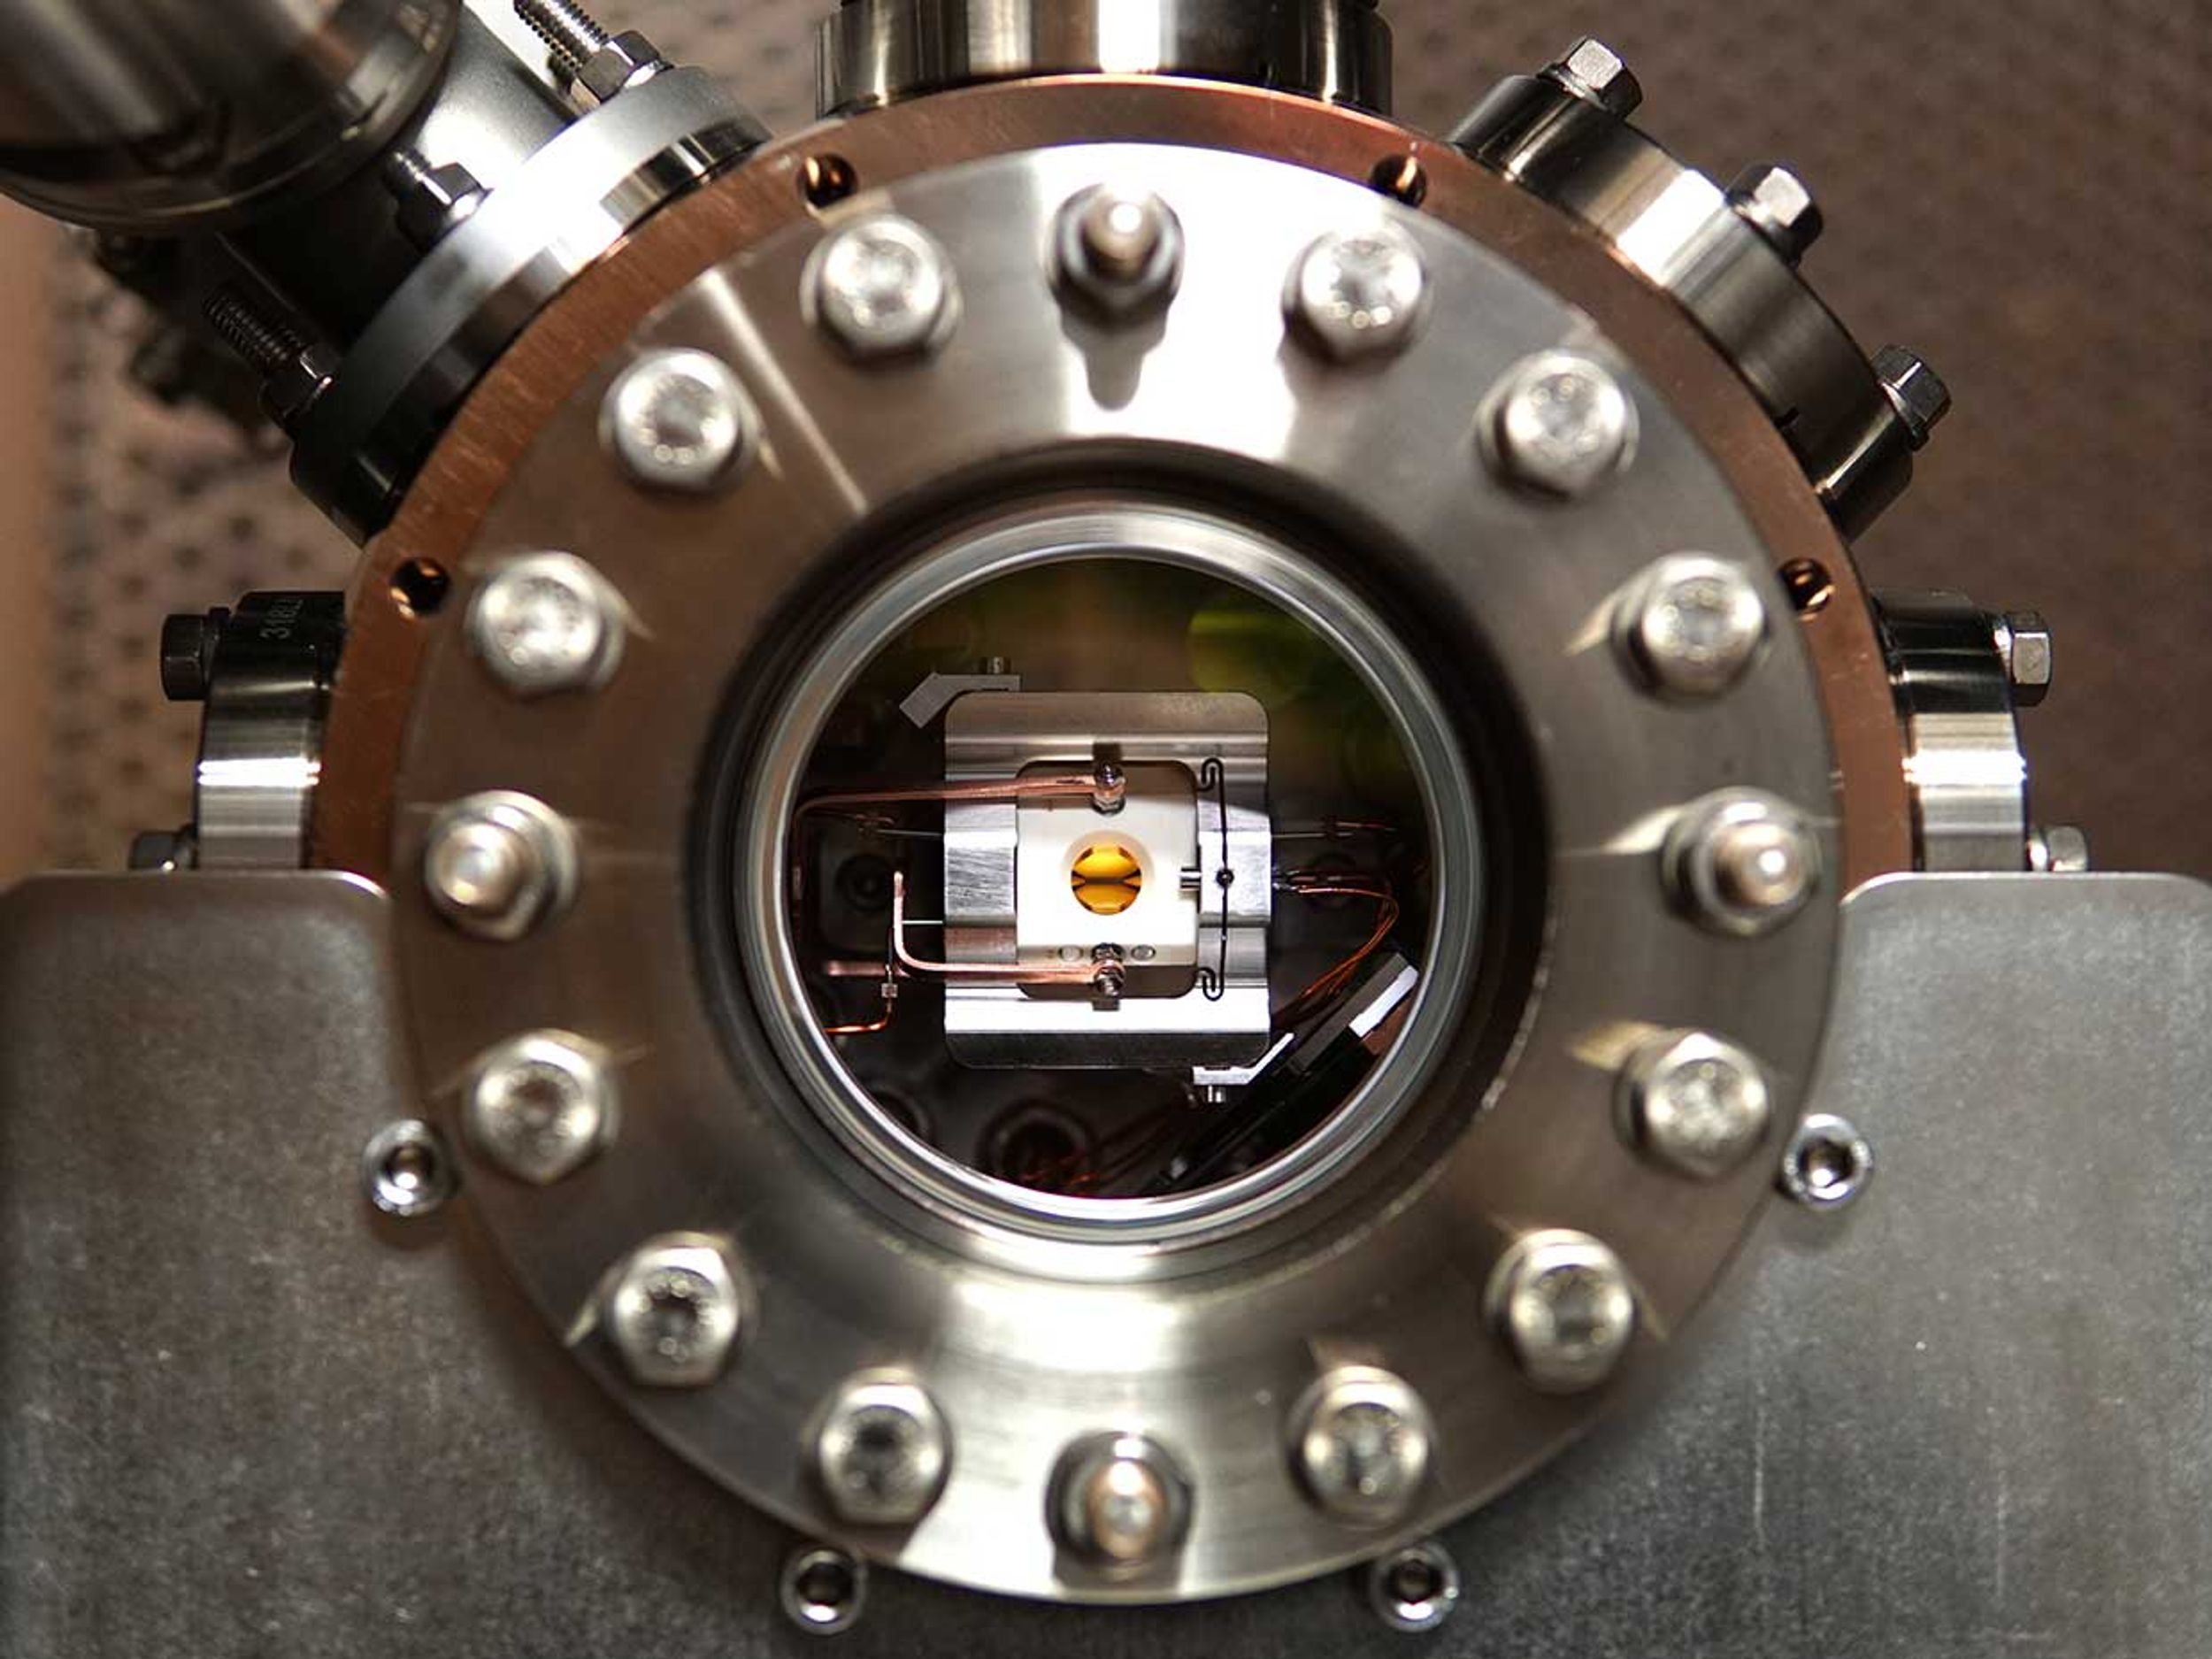 The centerpiece of the quantum computer: the ion trap in a vacuum chamber.